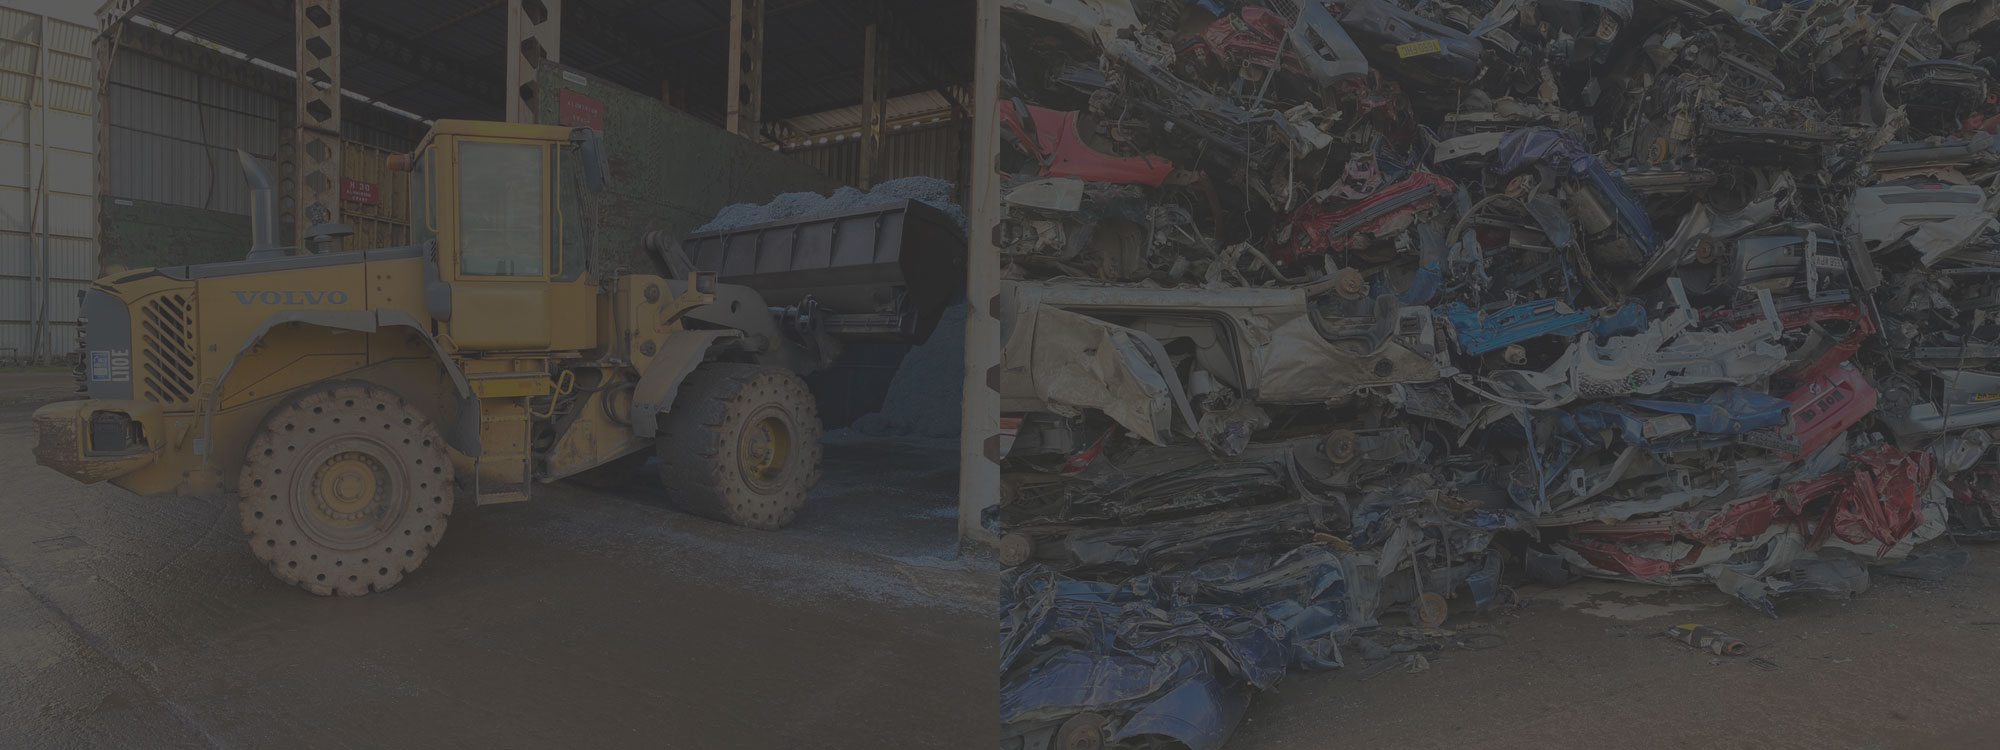 Scrap Metal Recycling for Peterborough and surrounding areas